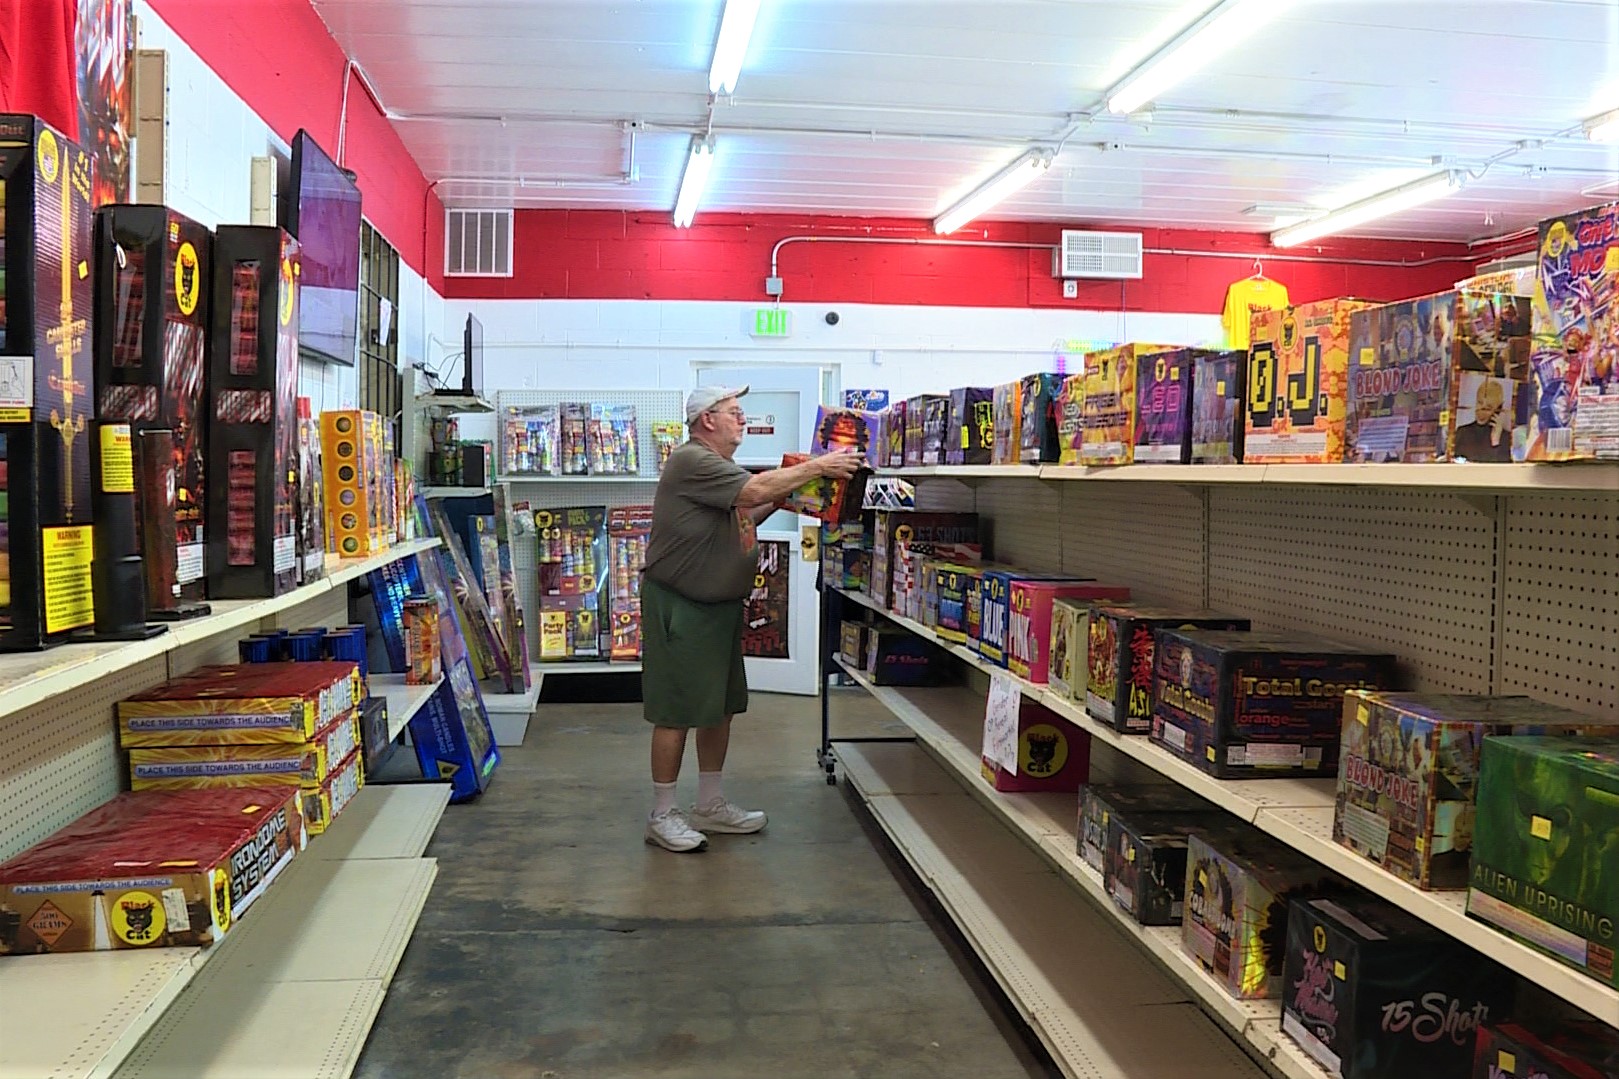 A man browsing the shelves of a fireworks store.